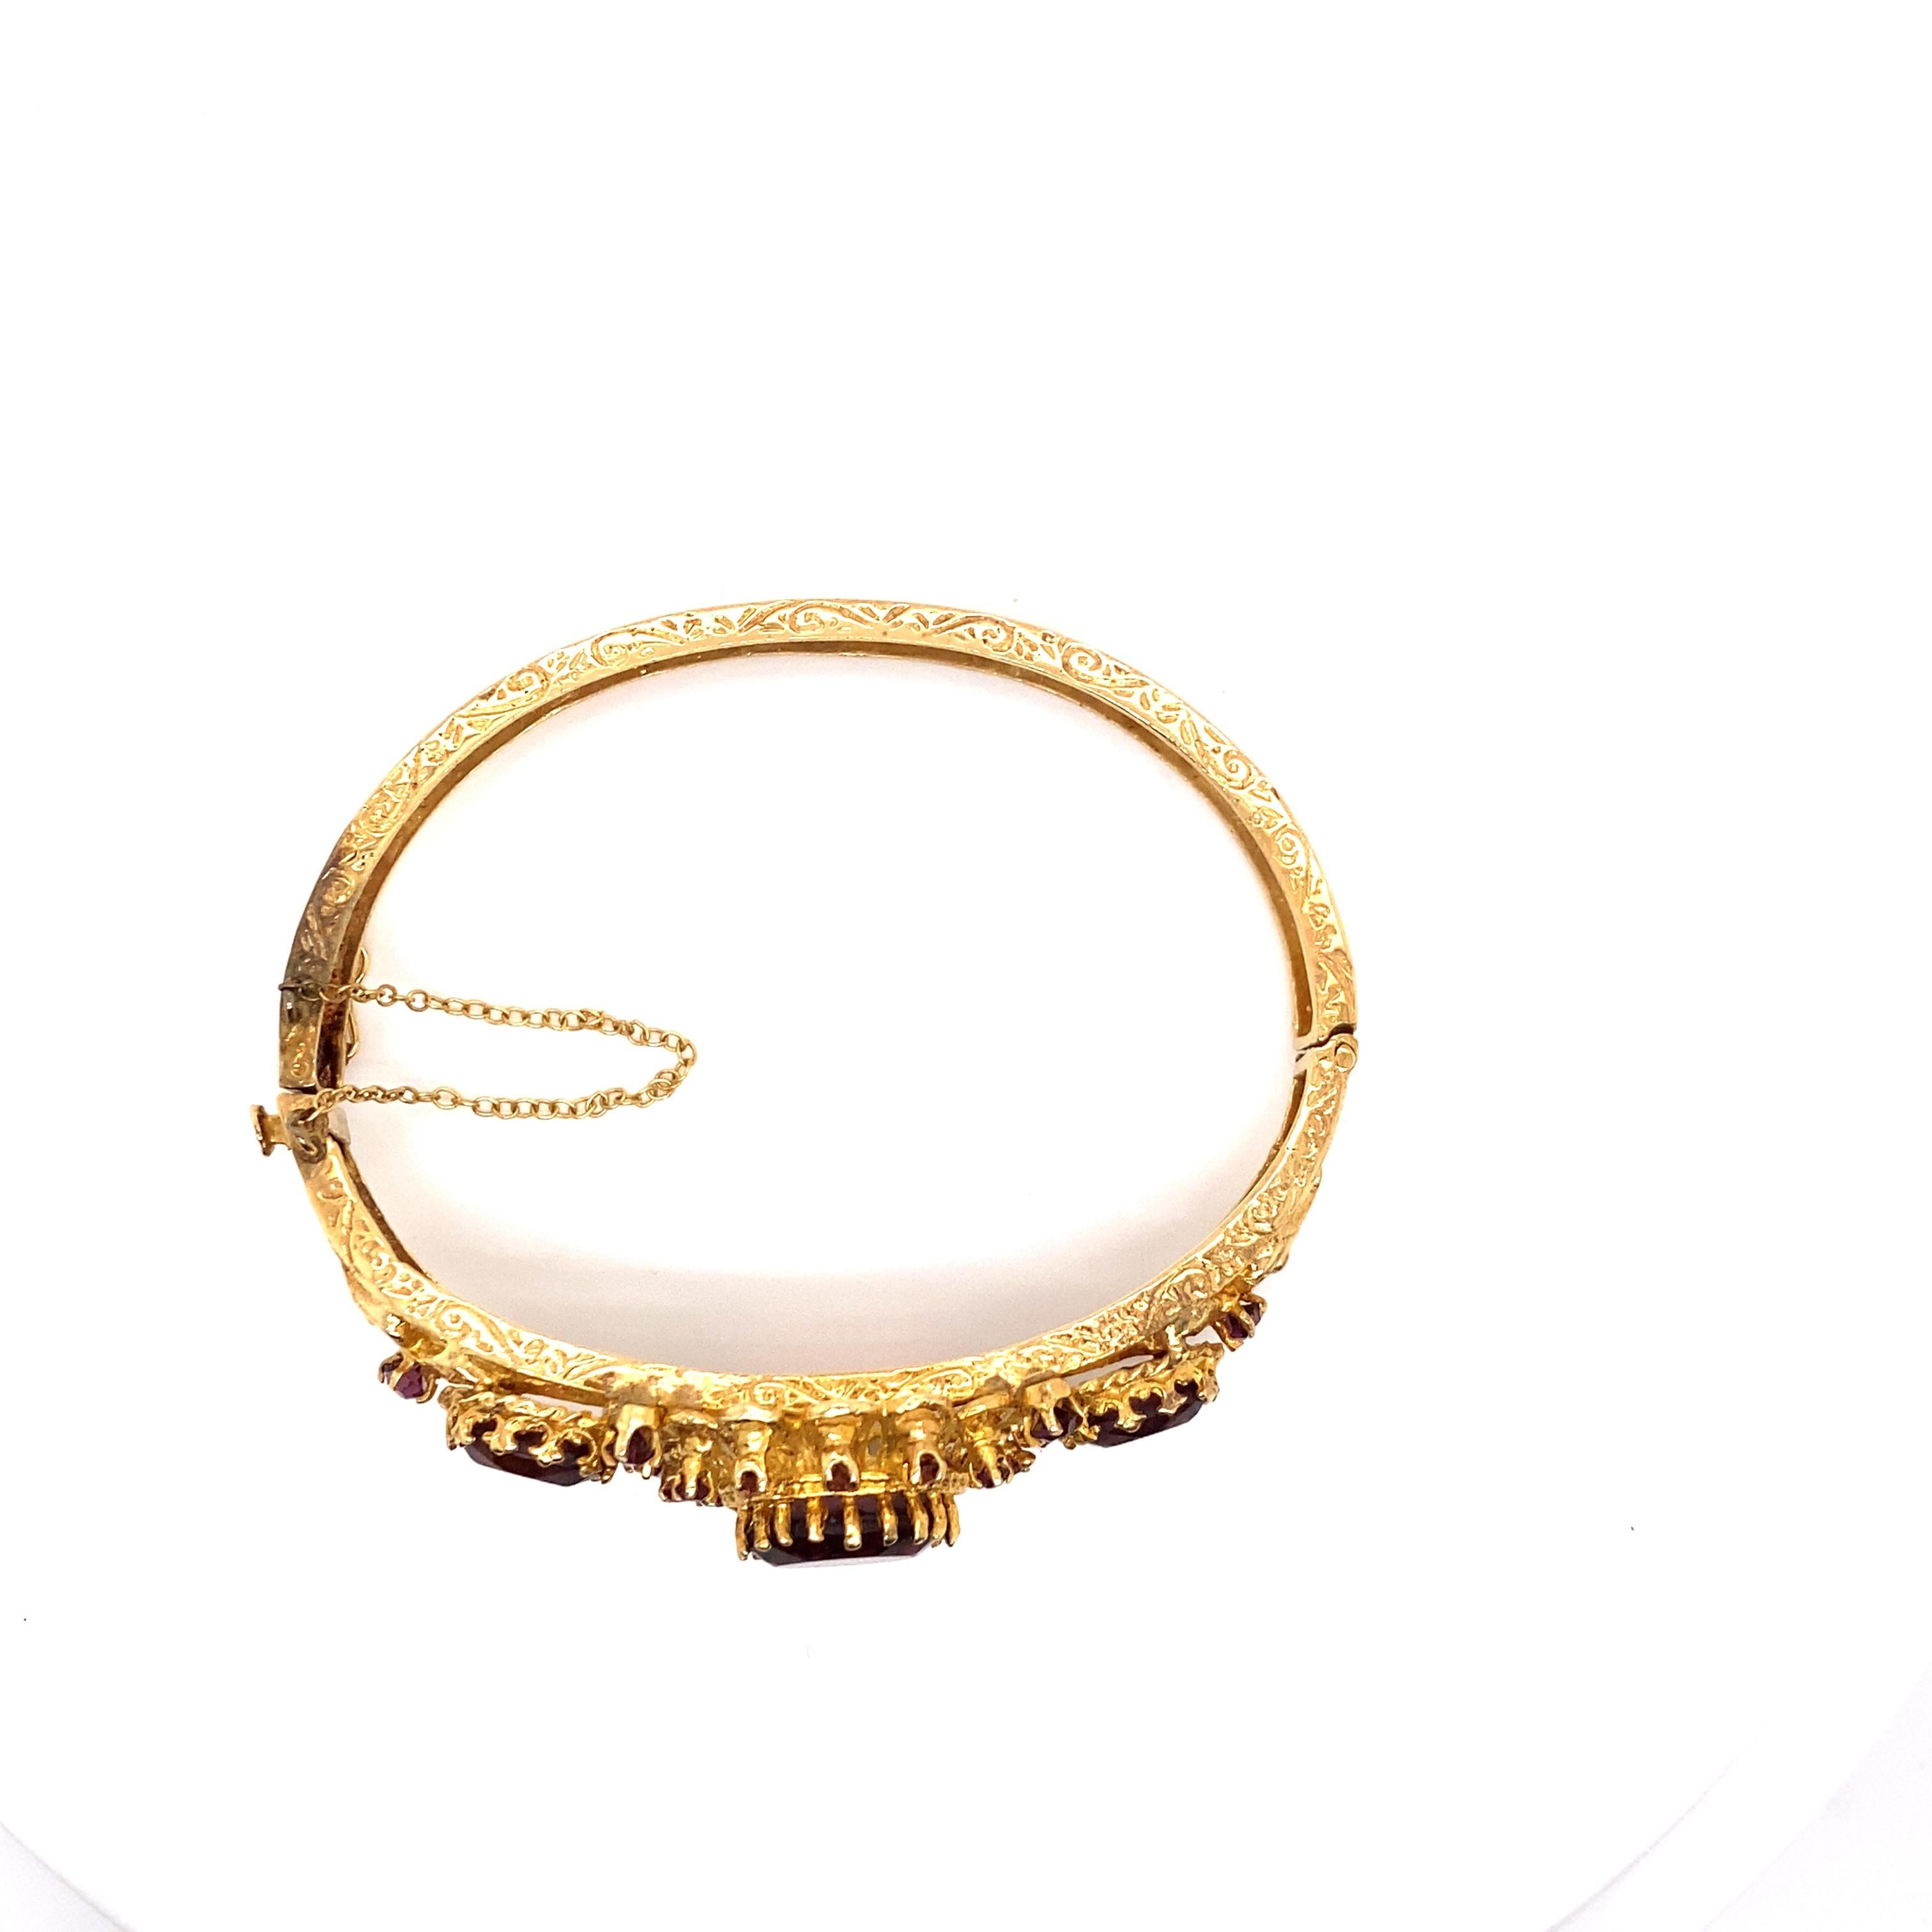 Victorian Vintage 1960's 14K Yellow Gold Bangle Bracelet with Purple Stones For Sale